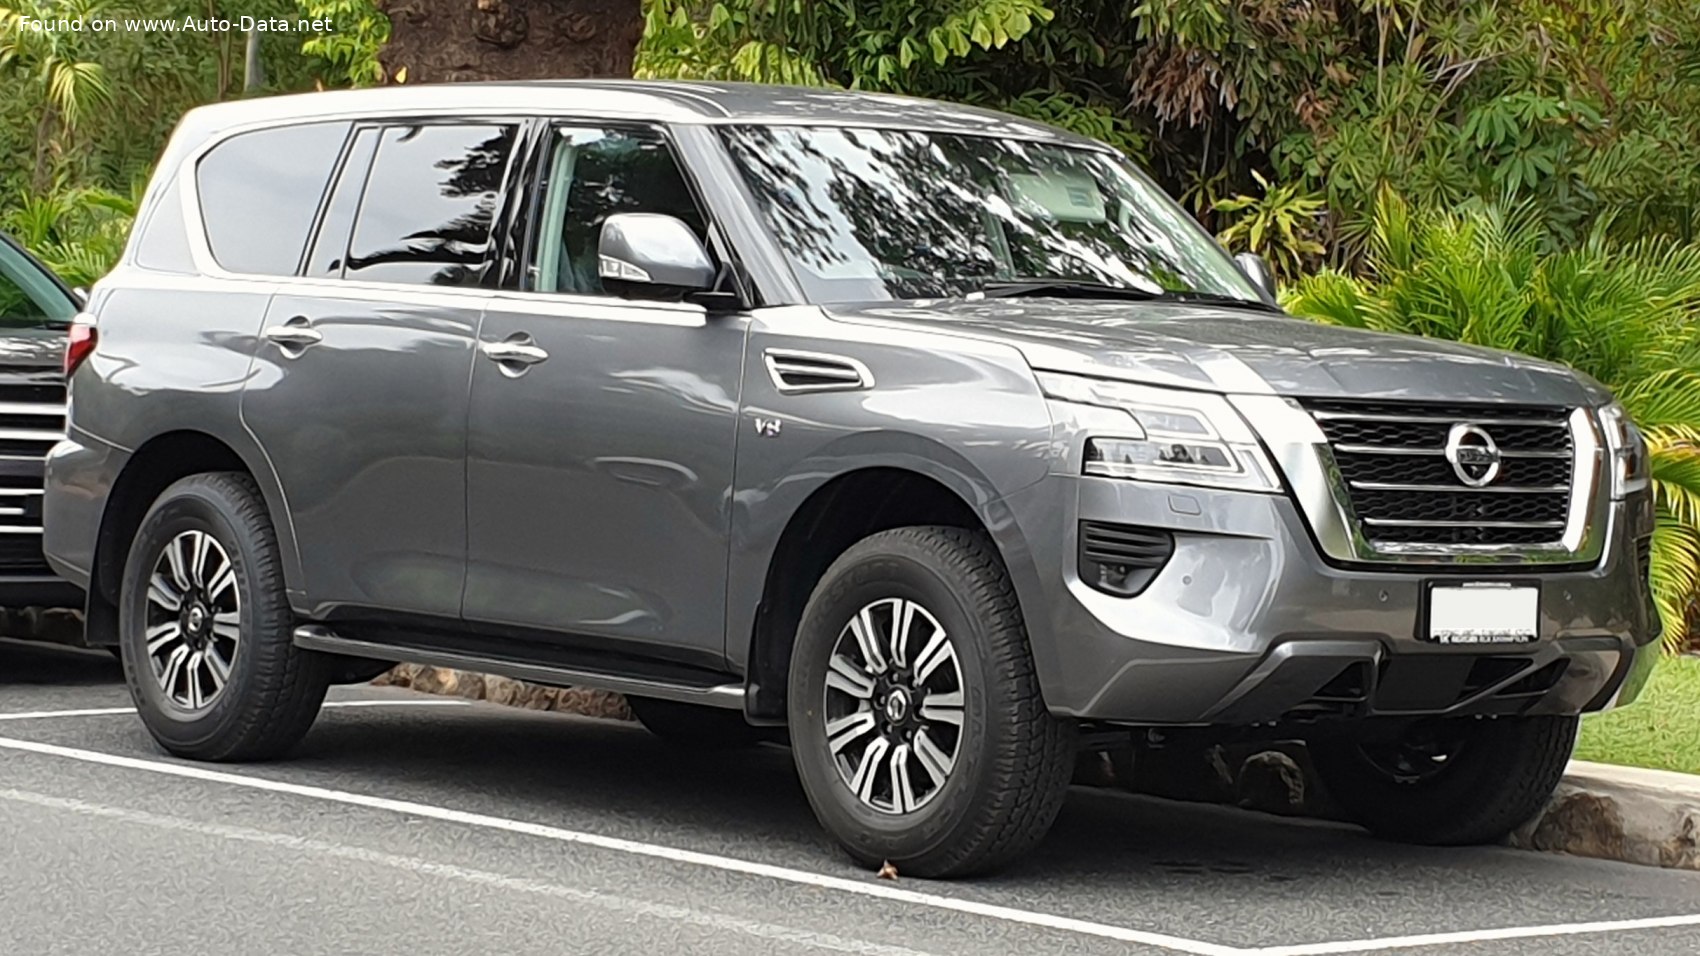 Nissan Patrol GR I (Y60) technical specifications and fuel consumption —